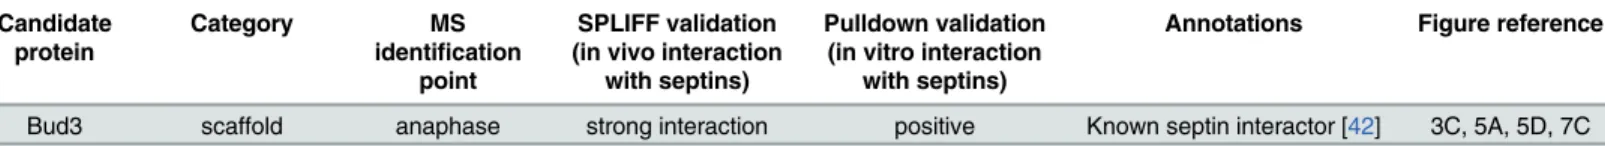 Table 1. ( Continued ) Candidate protein Category MSidenti ﬁ cation point SPLIFF validation (in vivo interaction